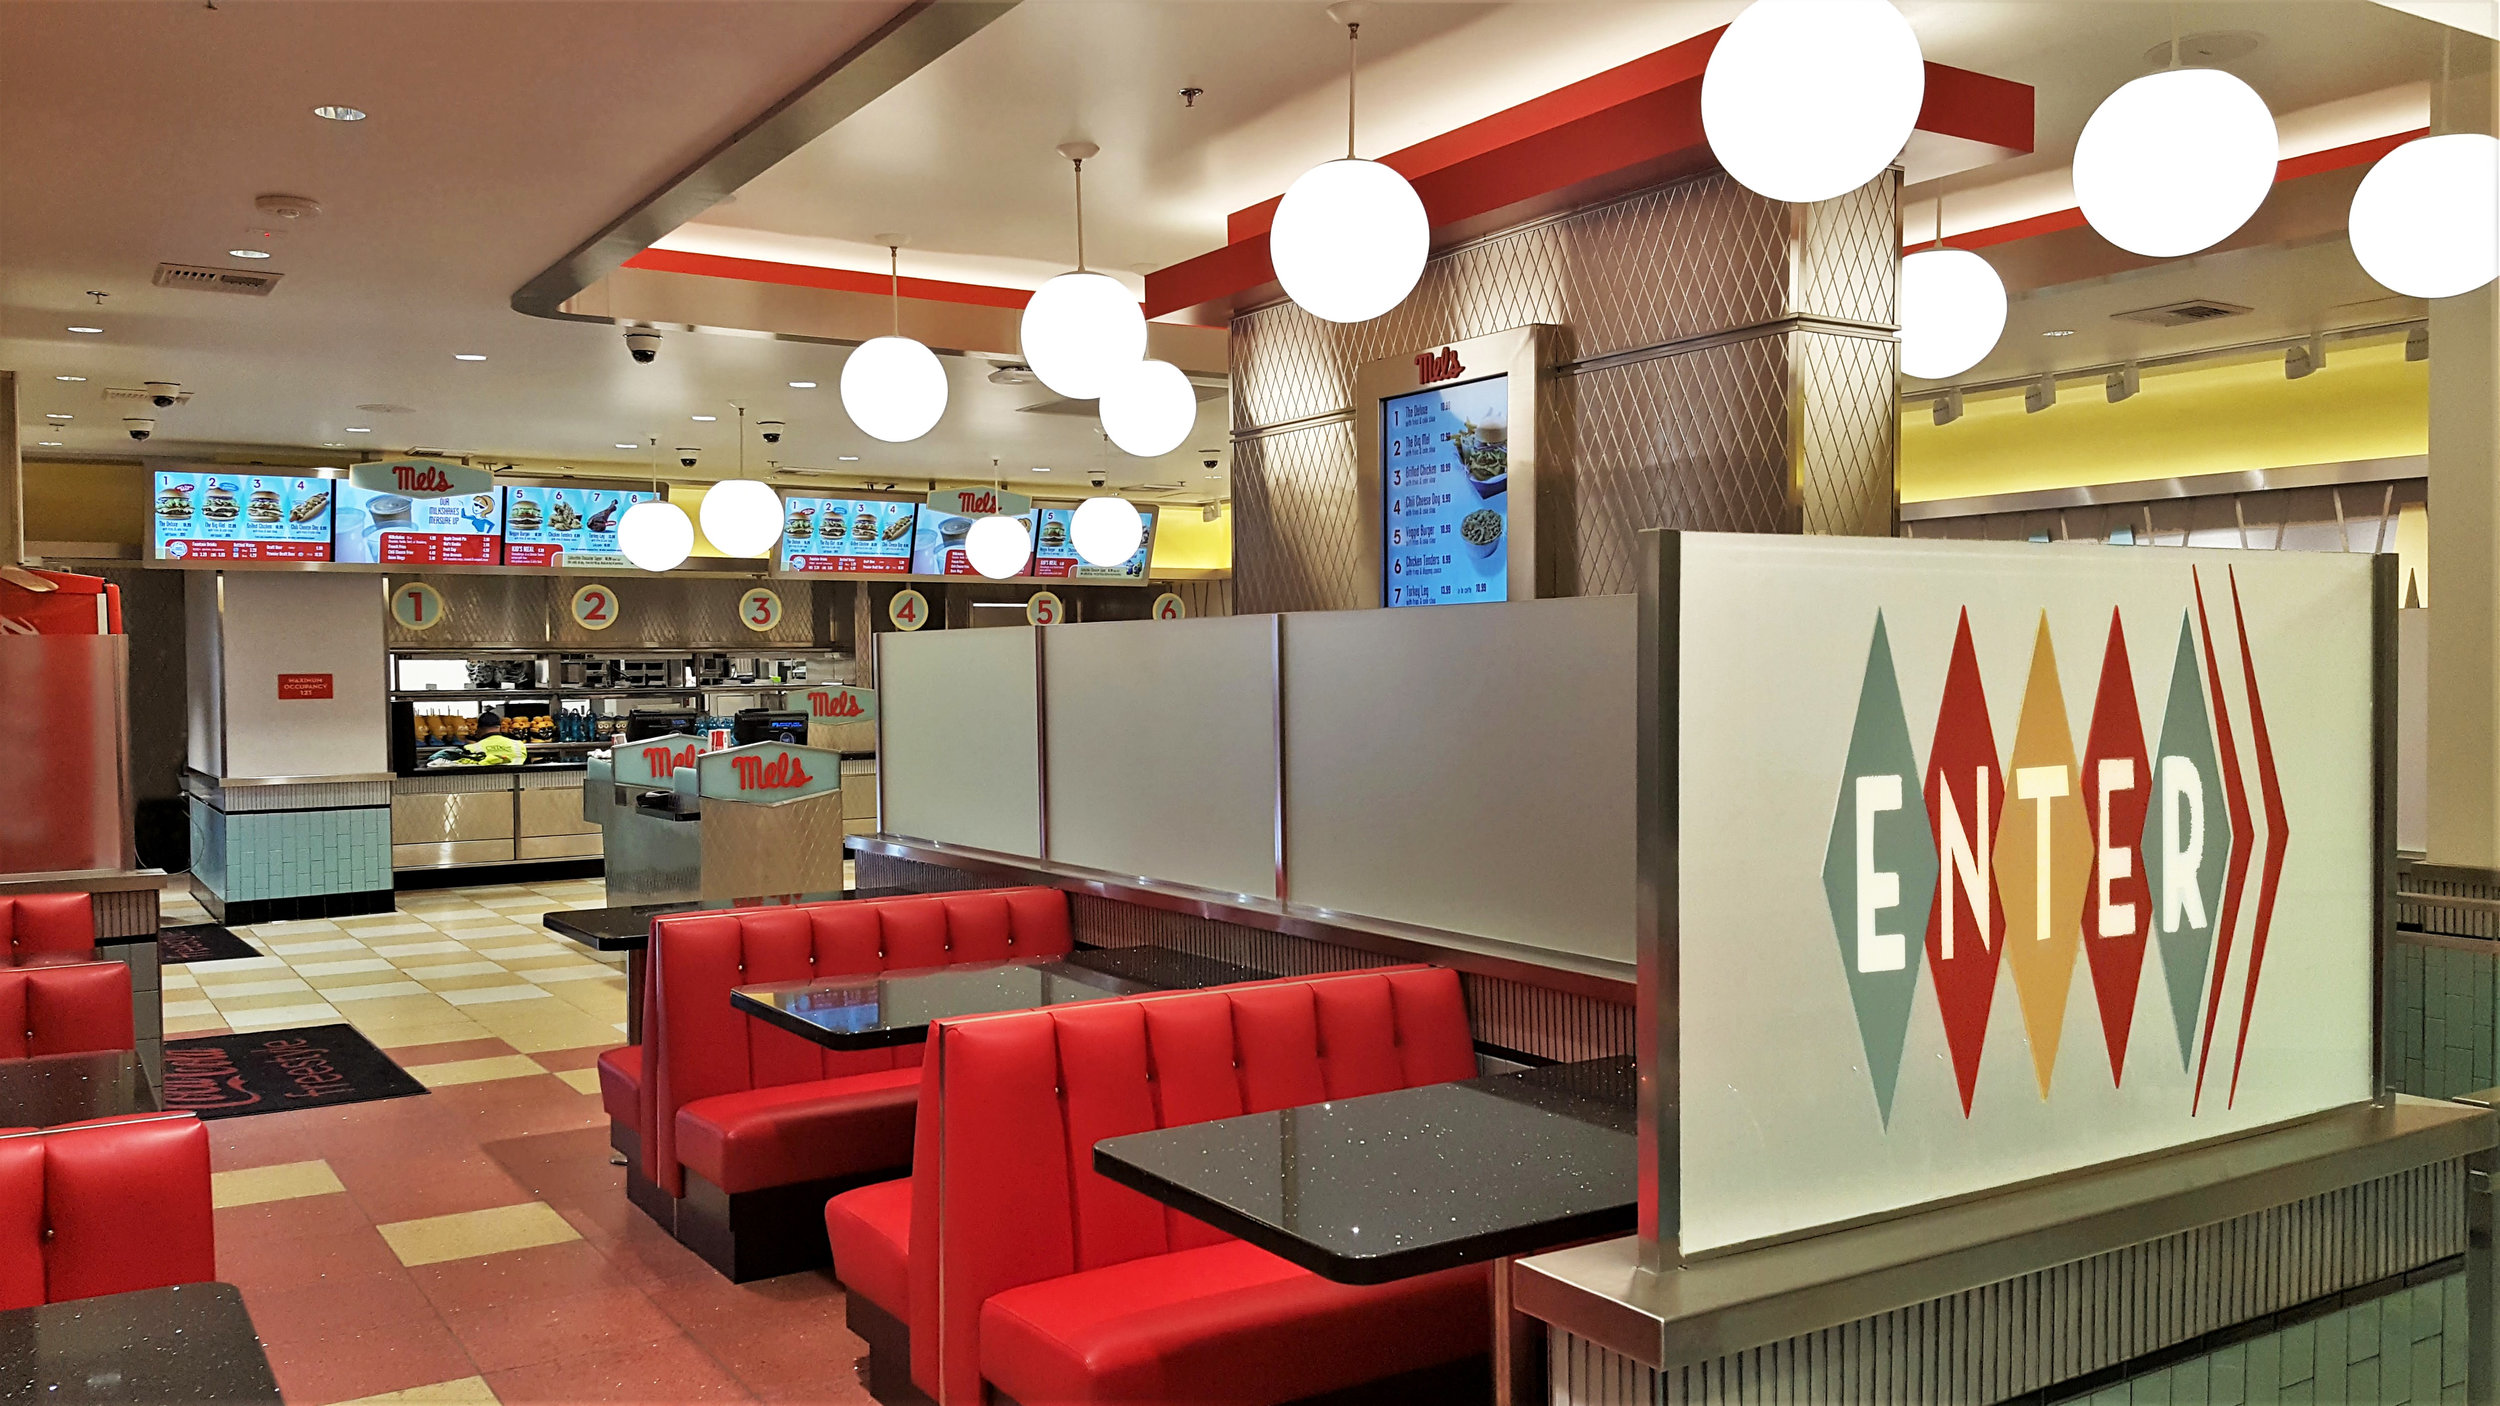 Mels diner. 6o's asthetic with red booths and spherical pendant lights